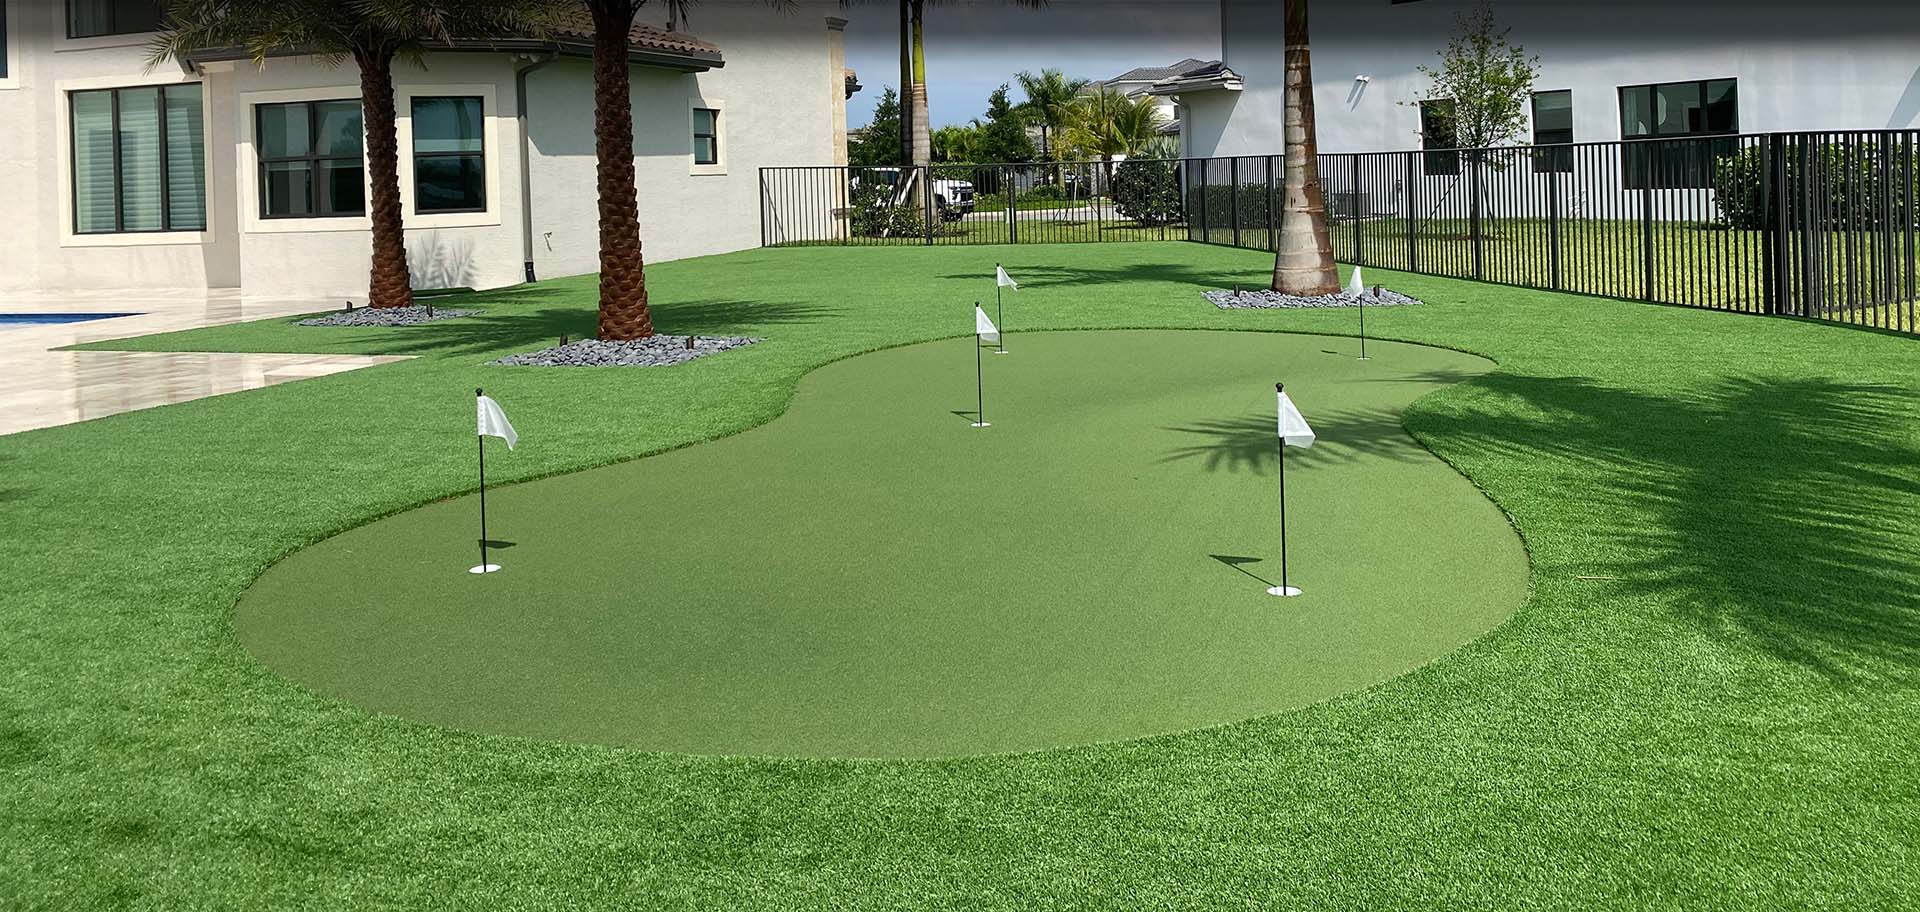 West Palm Beach Artificial Grass Installation, Synthetic Turf Installation and Putting Green Installation